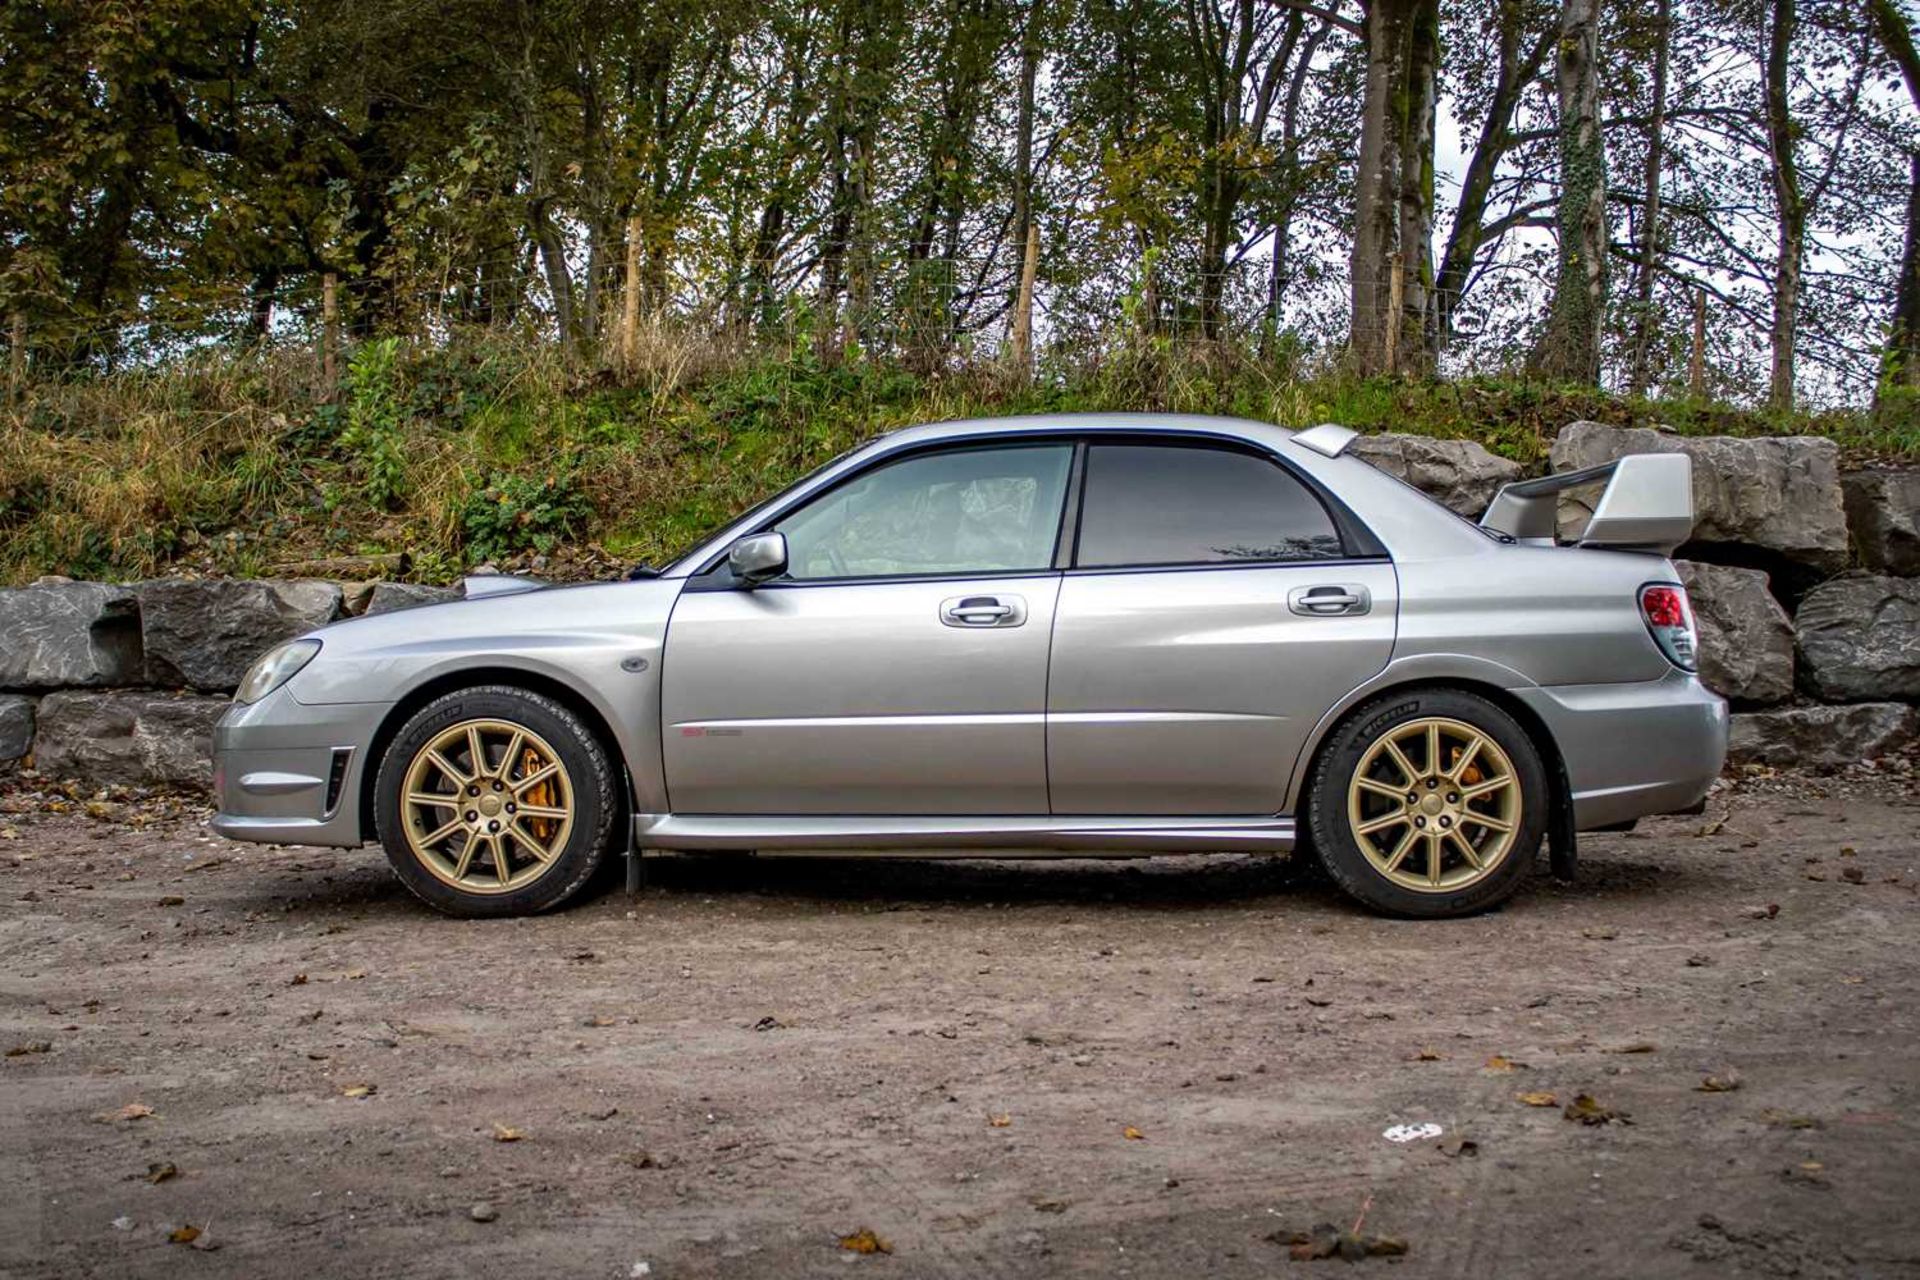 2006 Subaru Impreza WRX STi Featuring a plethora of desirable upgrades, supported by a dyno printout - Image 8 of 103